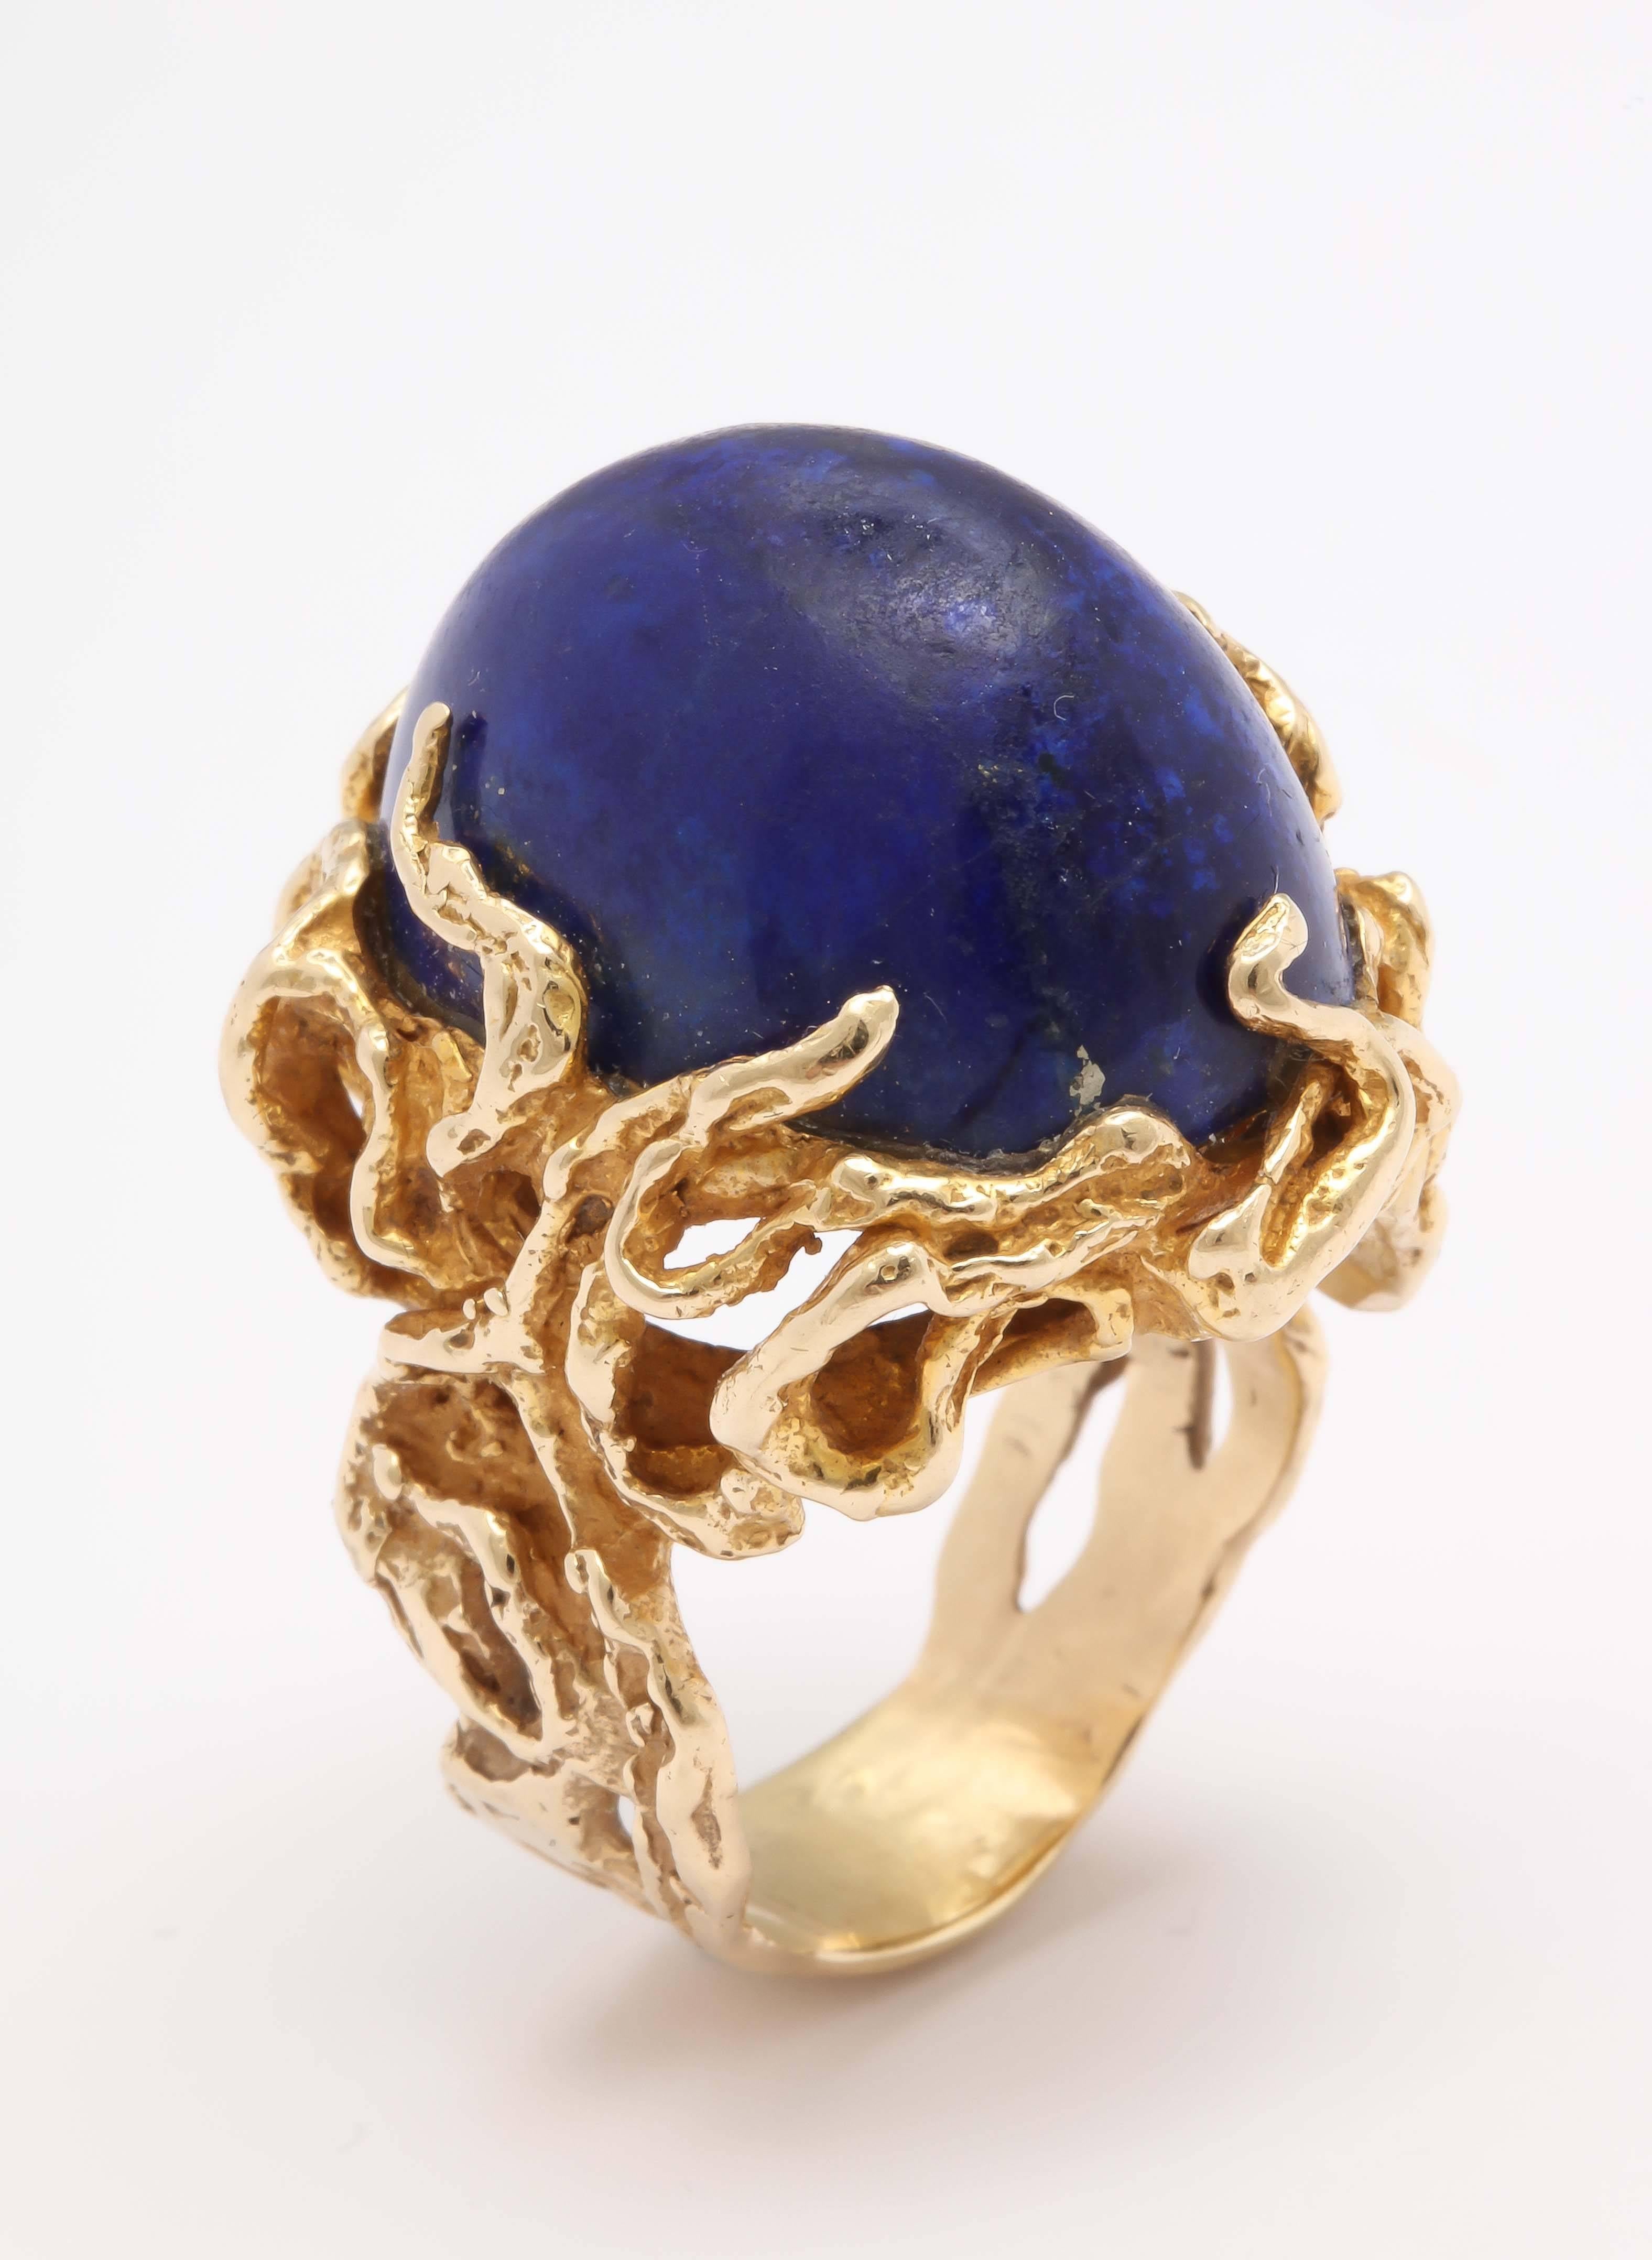 Large 50's 14kt kt Yellow Gold Branch setting, within which sits a large Cabochon Lapis Lazuli Oval stone. This certainly makes a statement.  Can be worn on an index or ring finger defending on how much attention that you want to attract. Fits a